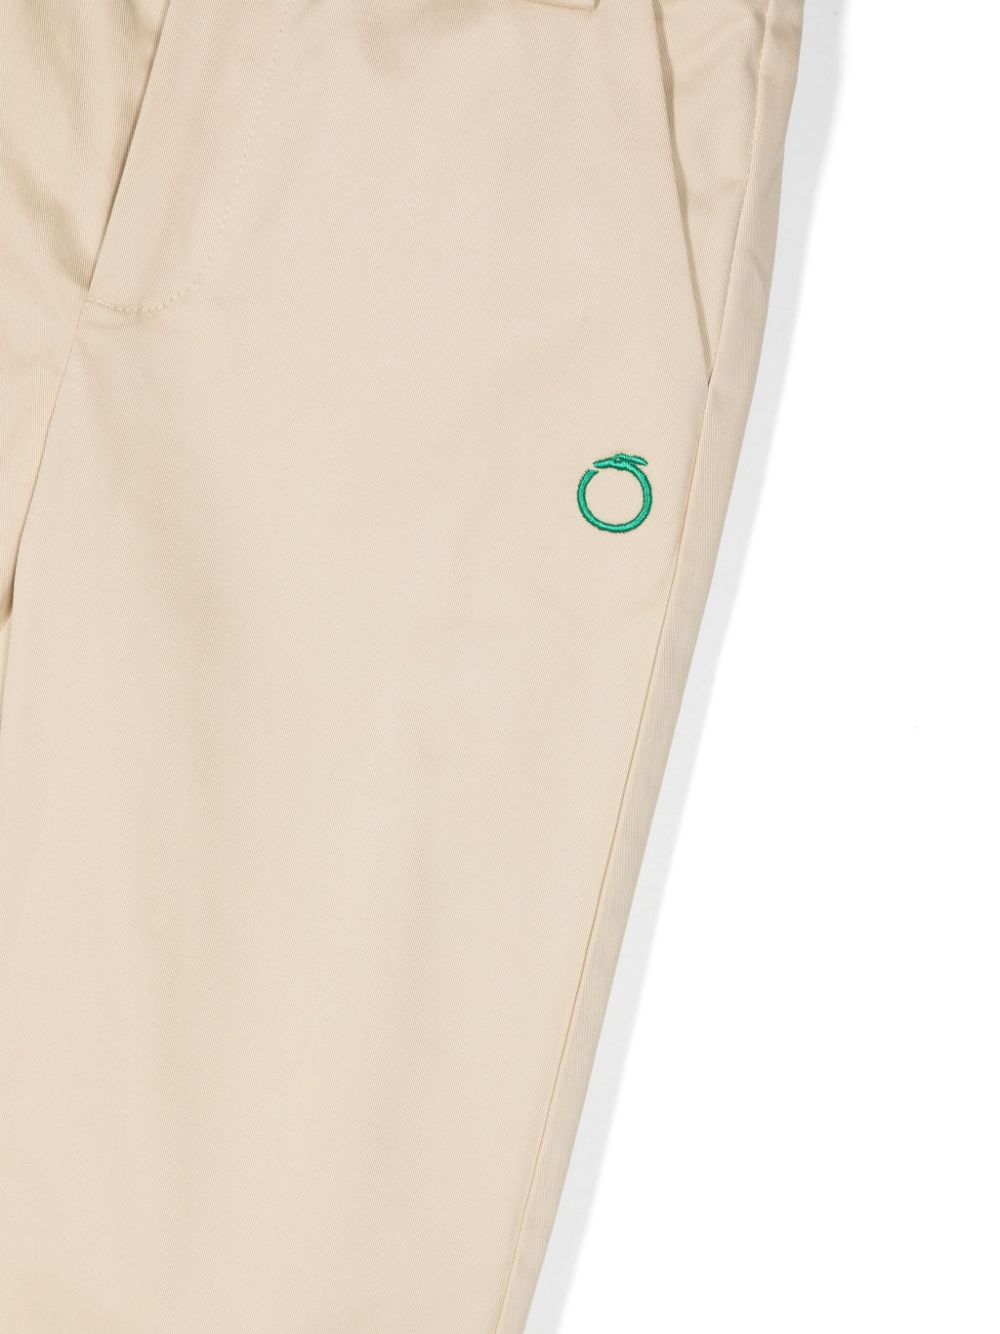 Beige trousers for children with green logo